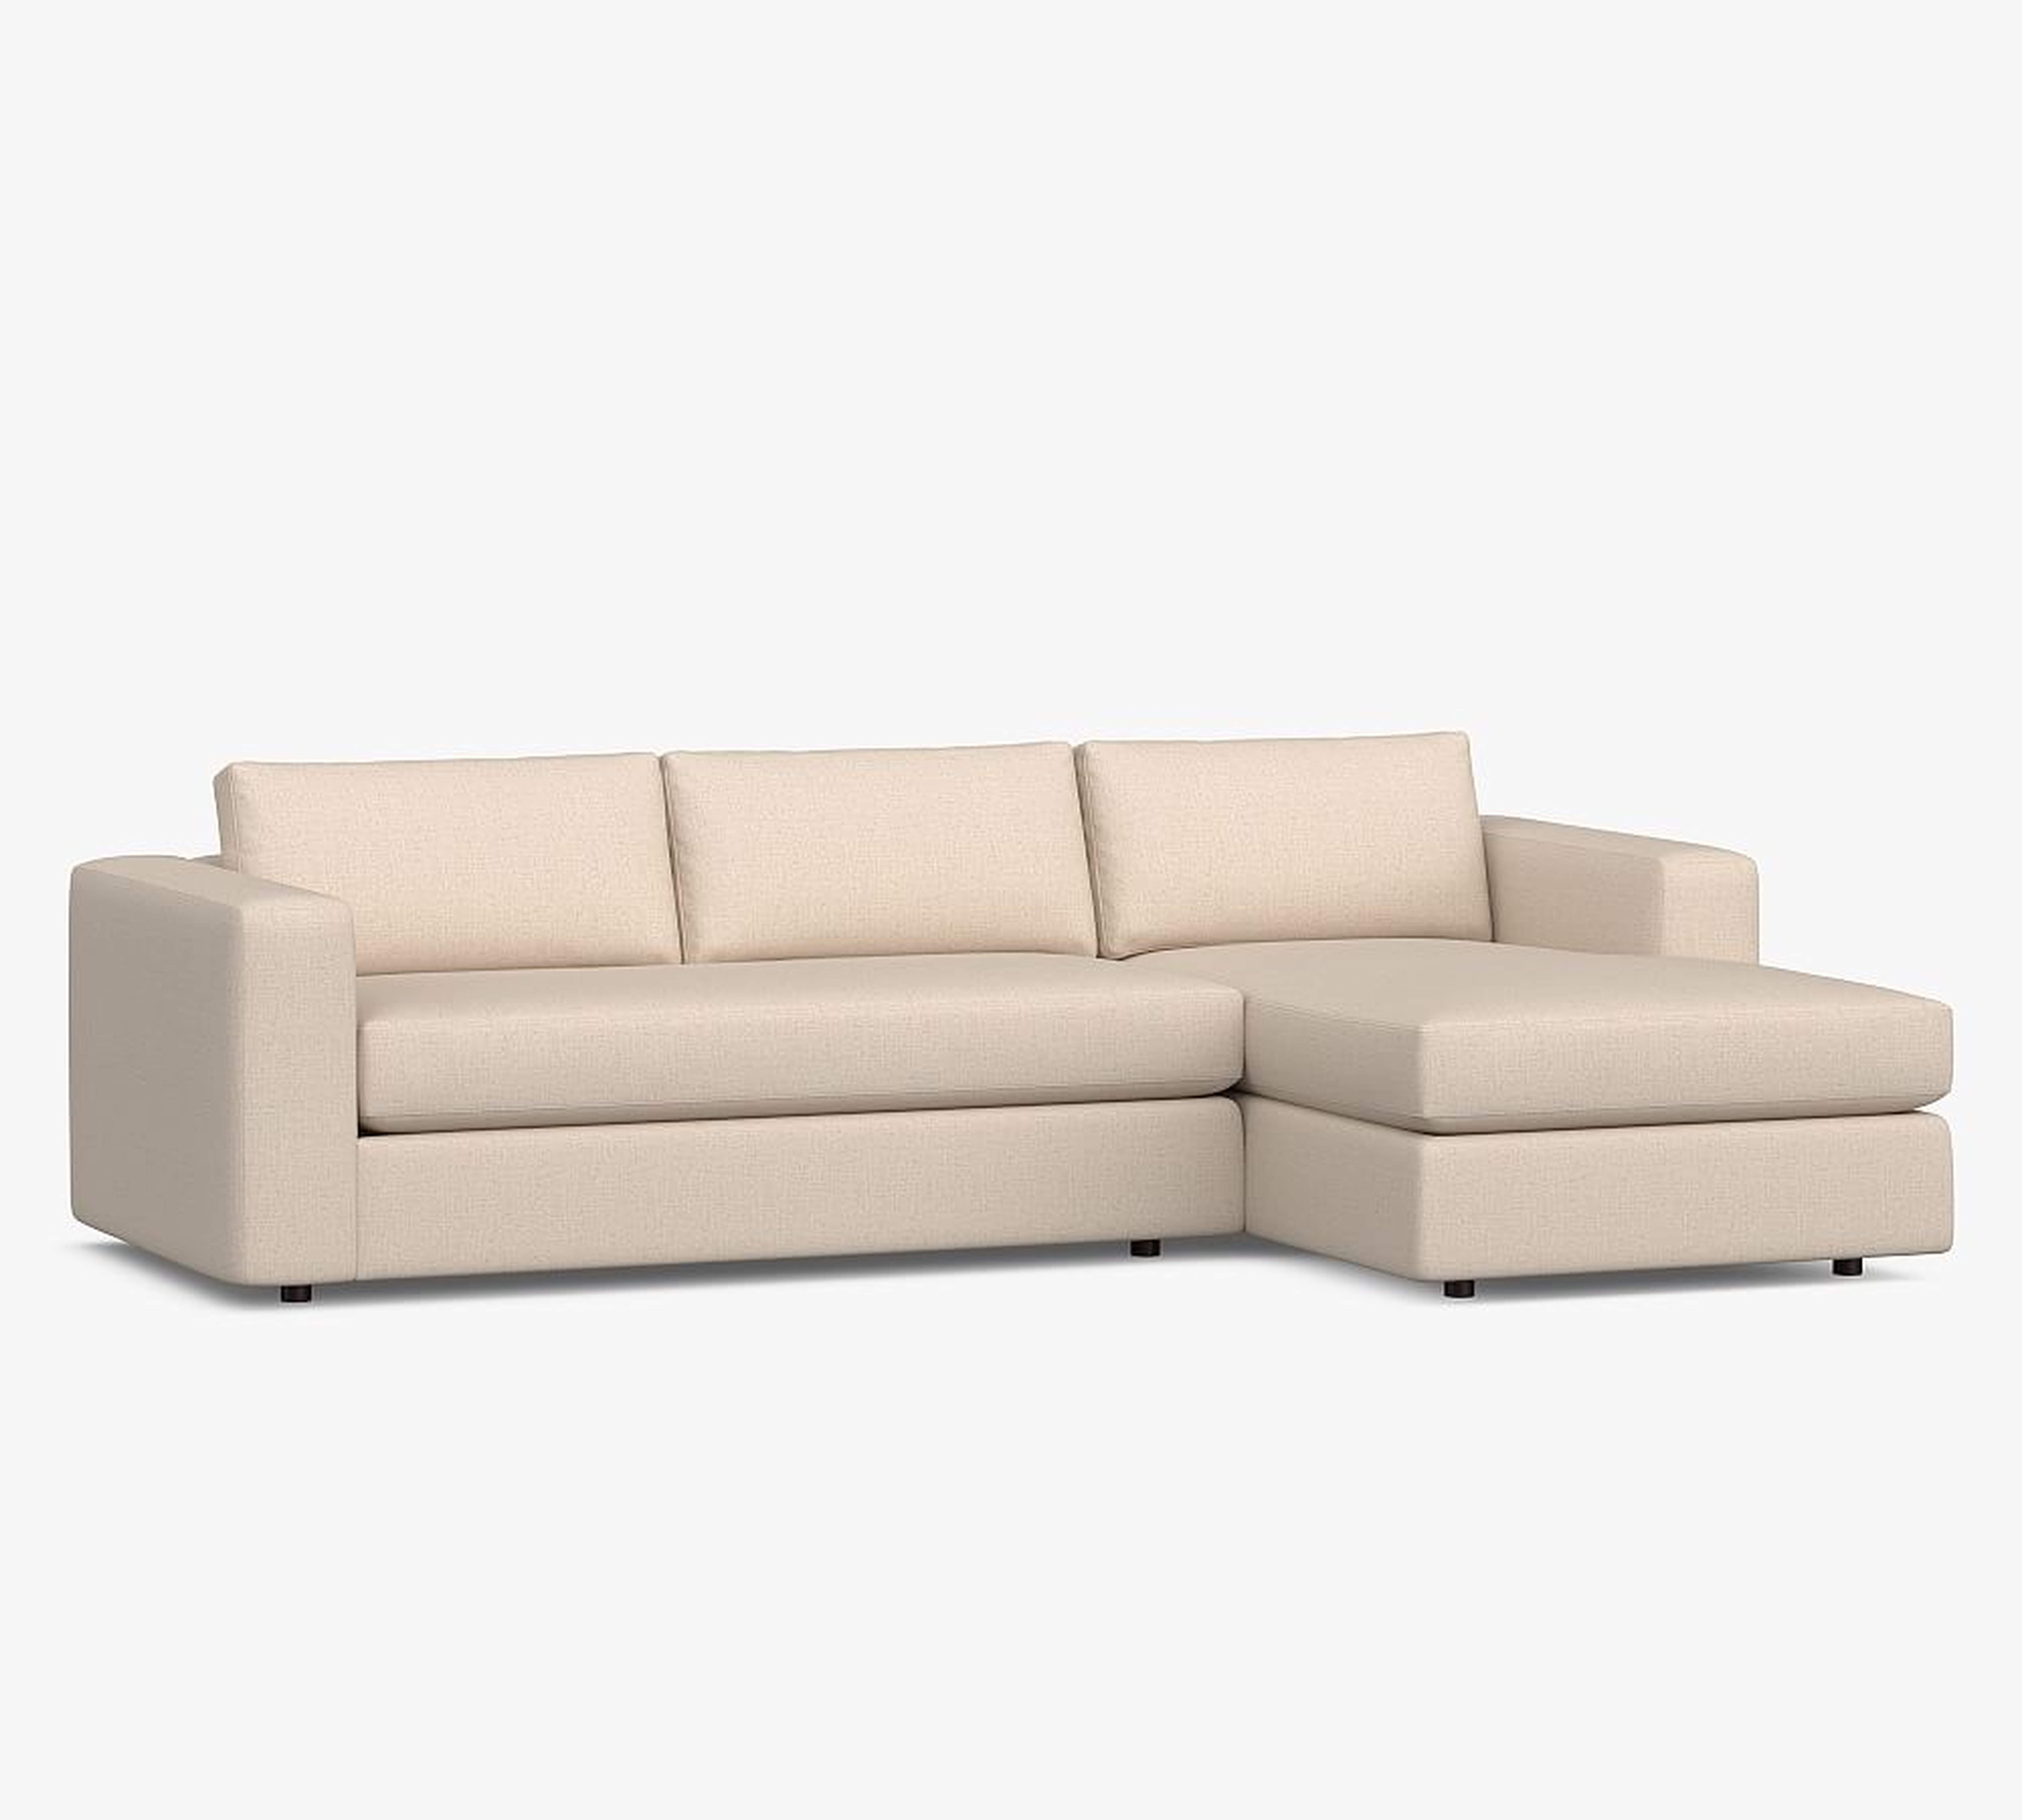 Carmel Square Arm Upholstered Left Loveseat with Chaise Sectional with Bench Cushion, Down Blend Wrapped Cushions, Performance Heathered Basketweave Alabaster White - Pottery Barn